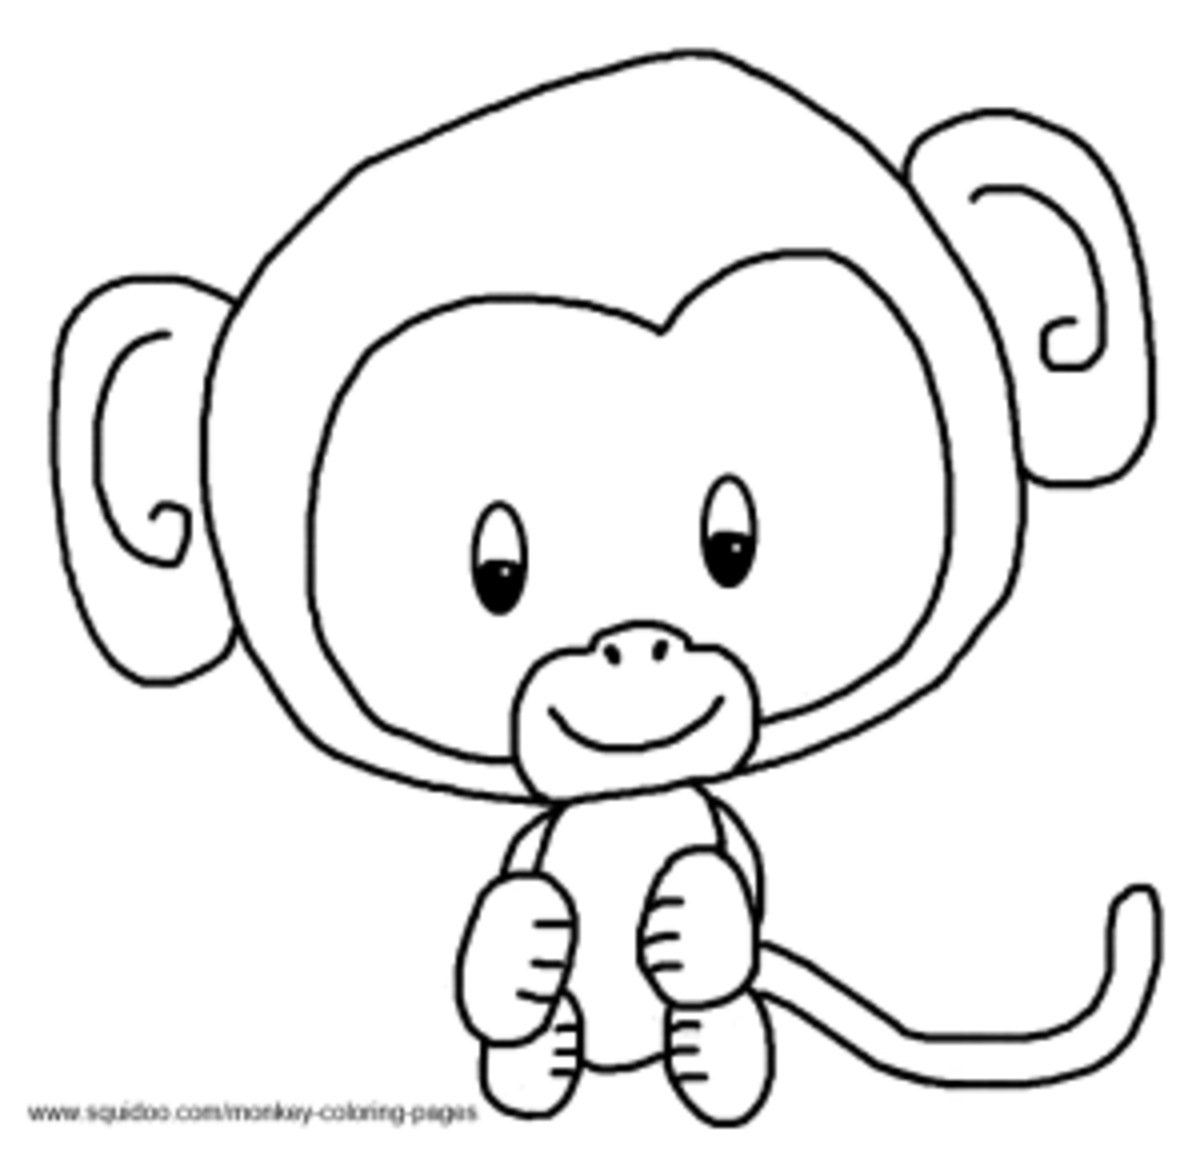 Cartoon monkey coloring pages